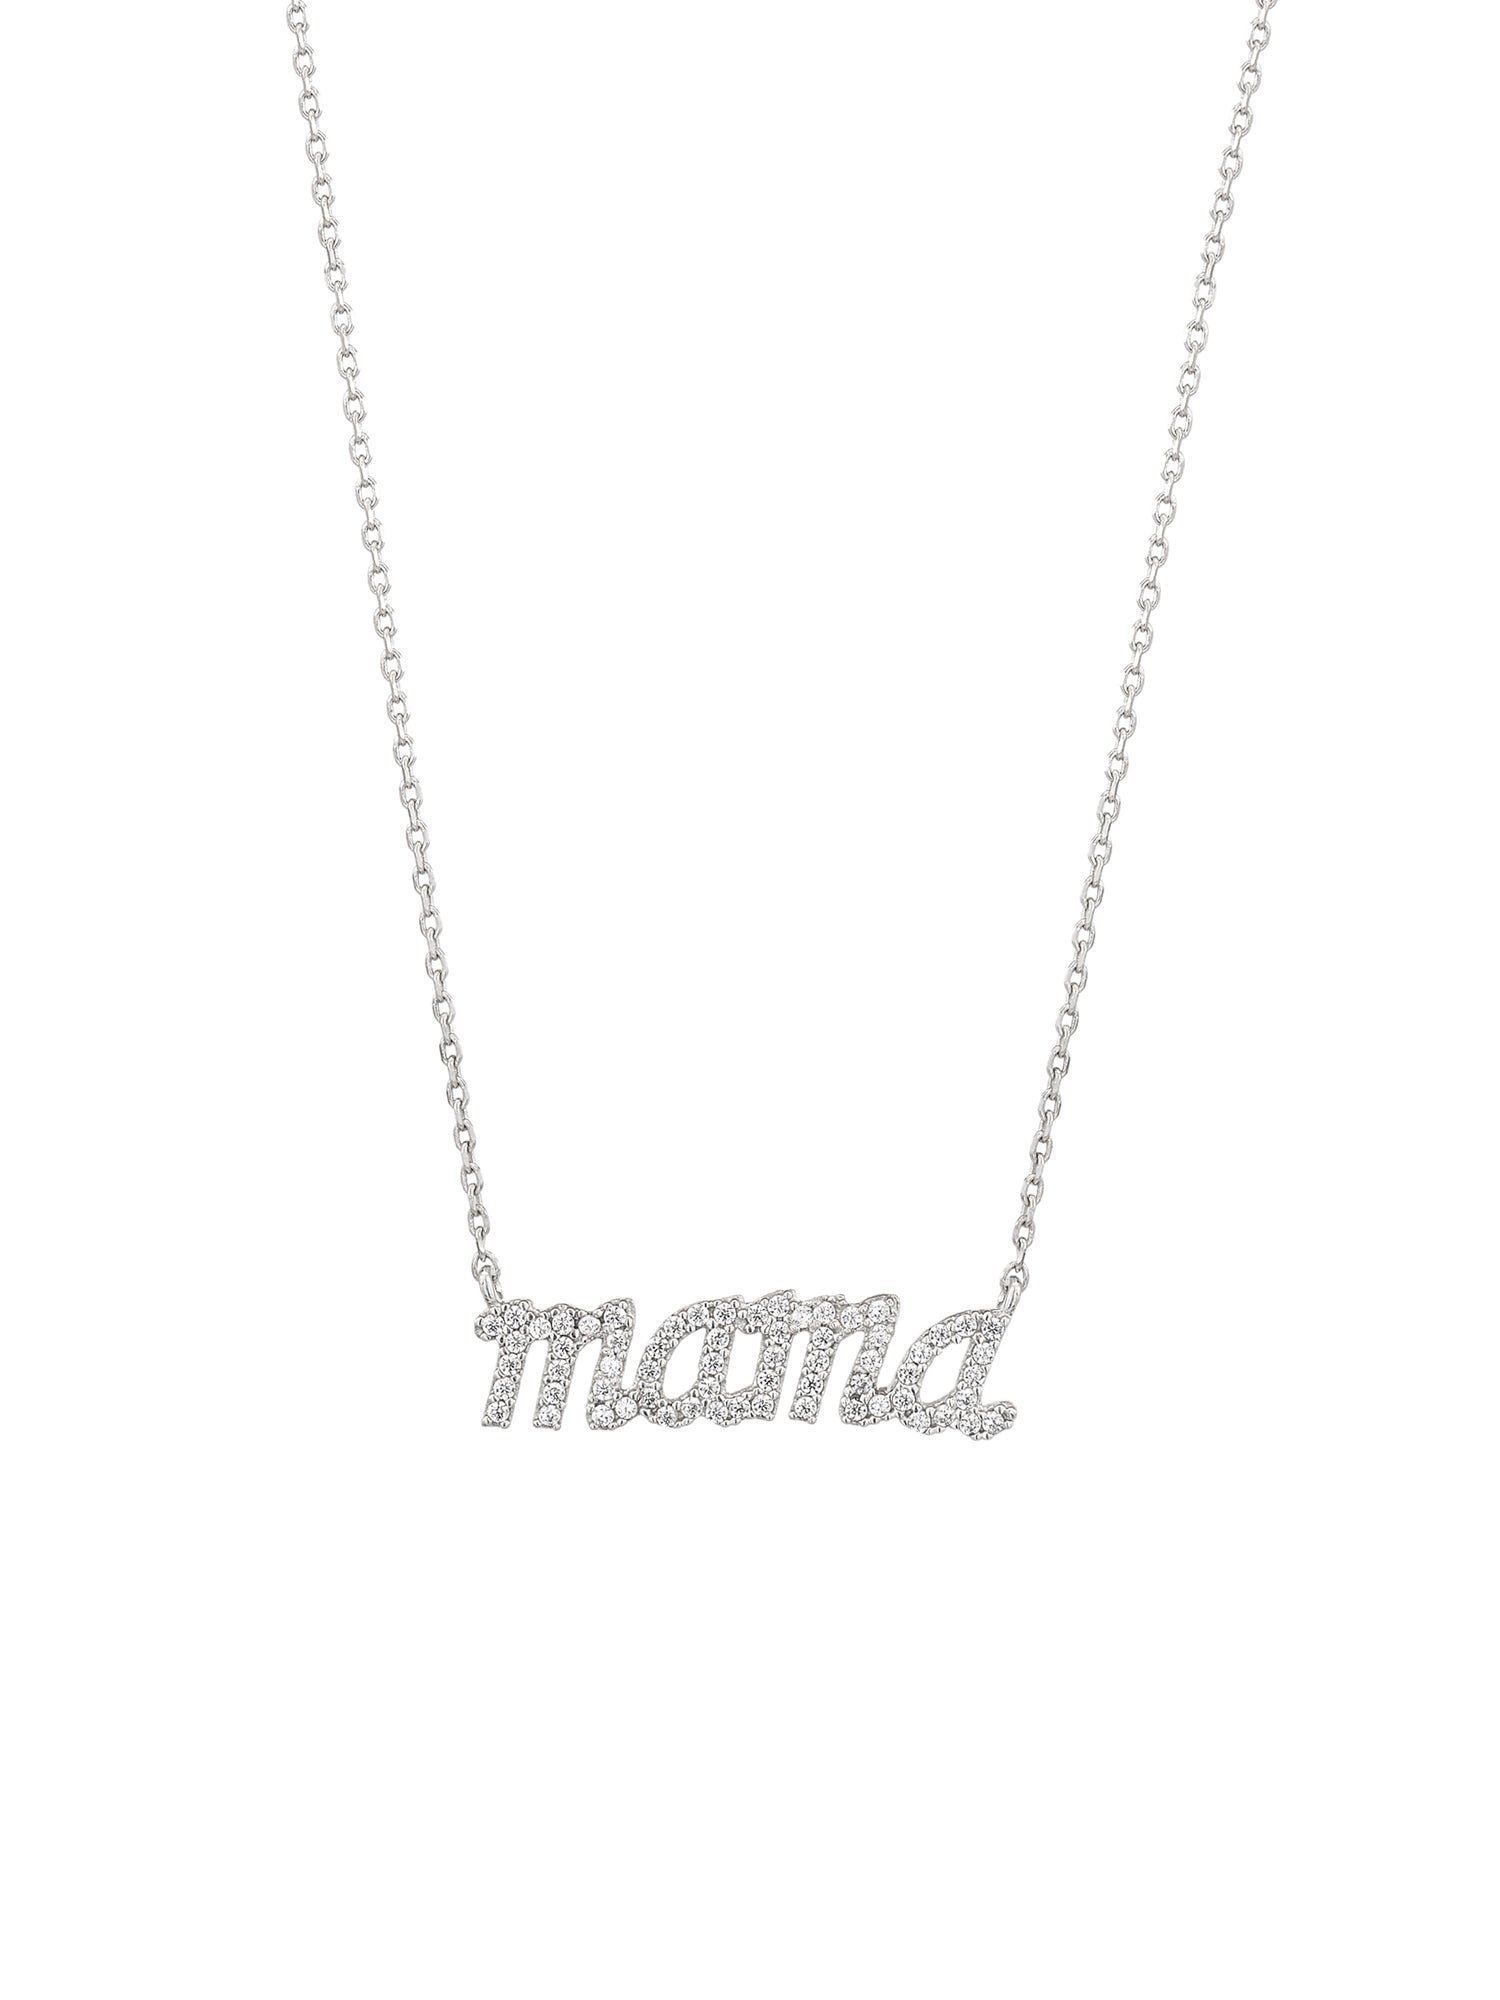 925 STERLING SILVER MAMA PENDANT NECKLACE WITH CHAIN-1